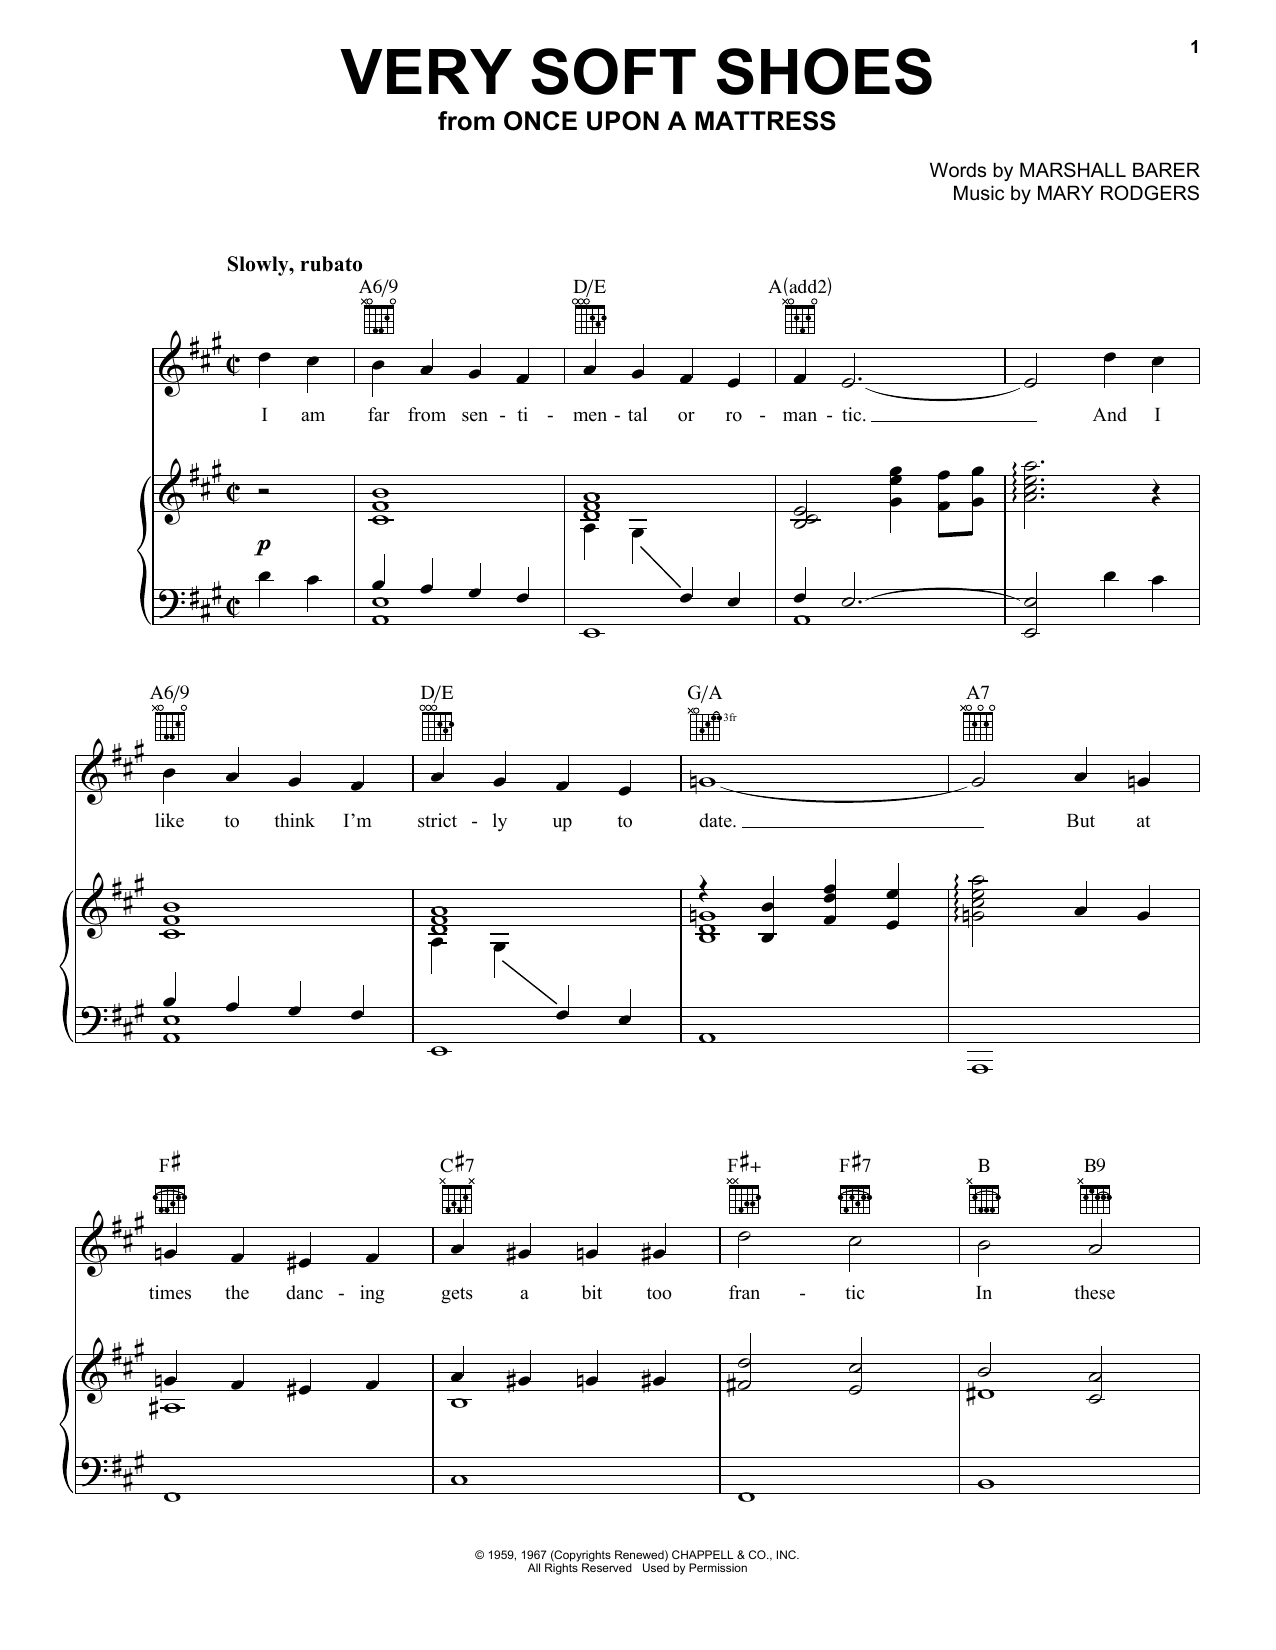 Download Rodgers & Barer Very Soft Shoes Sheet Music